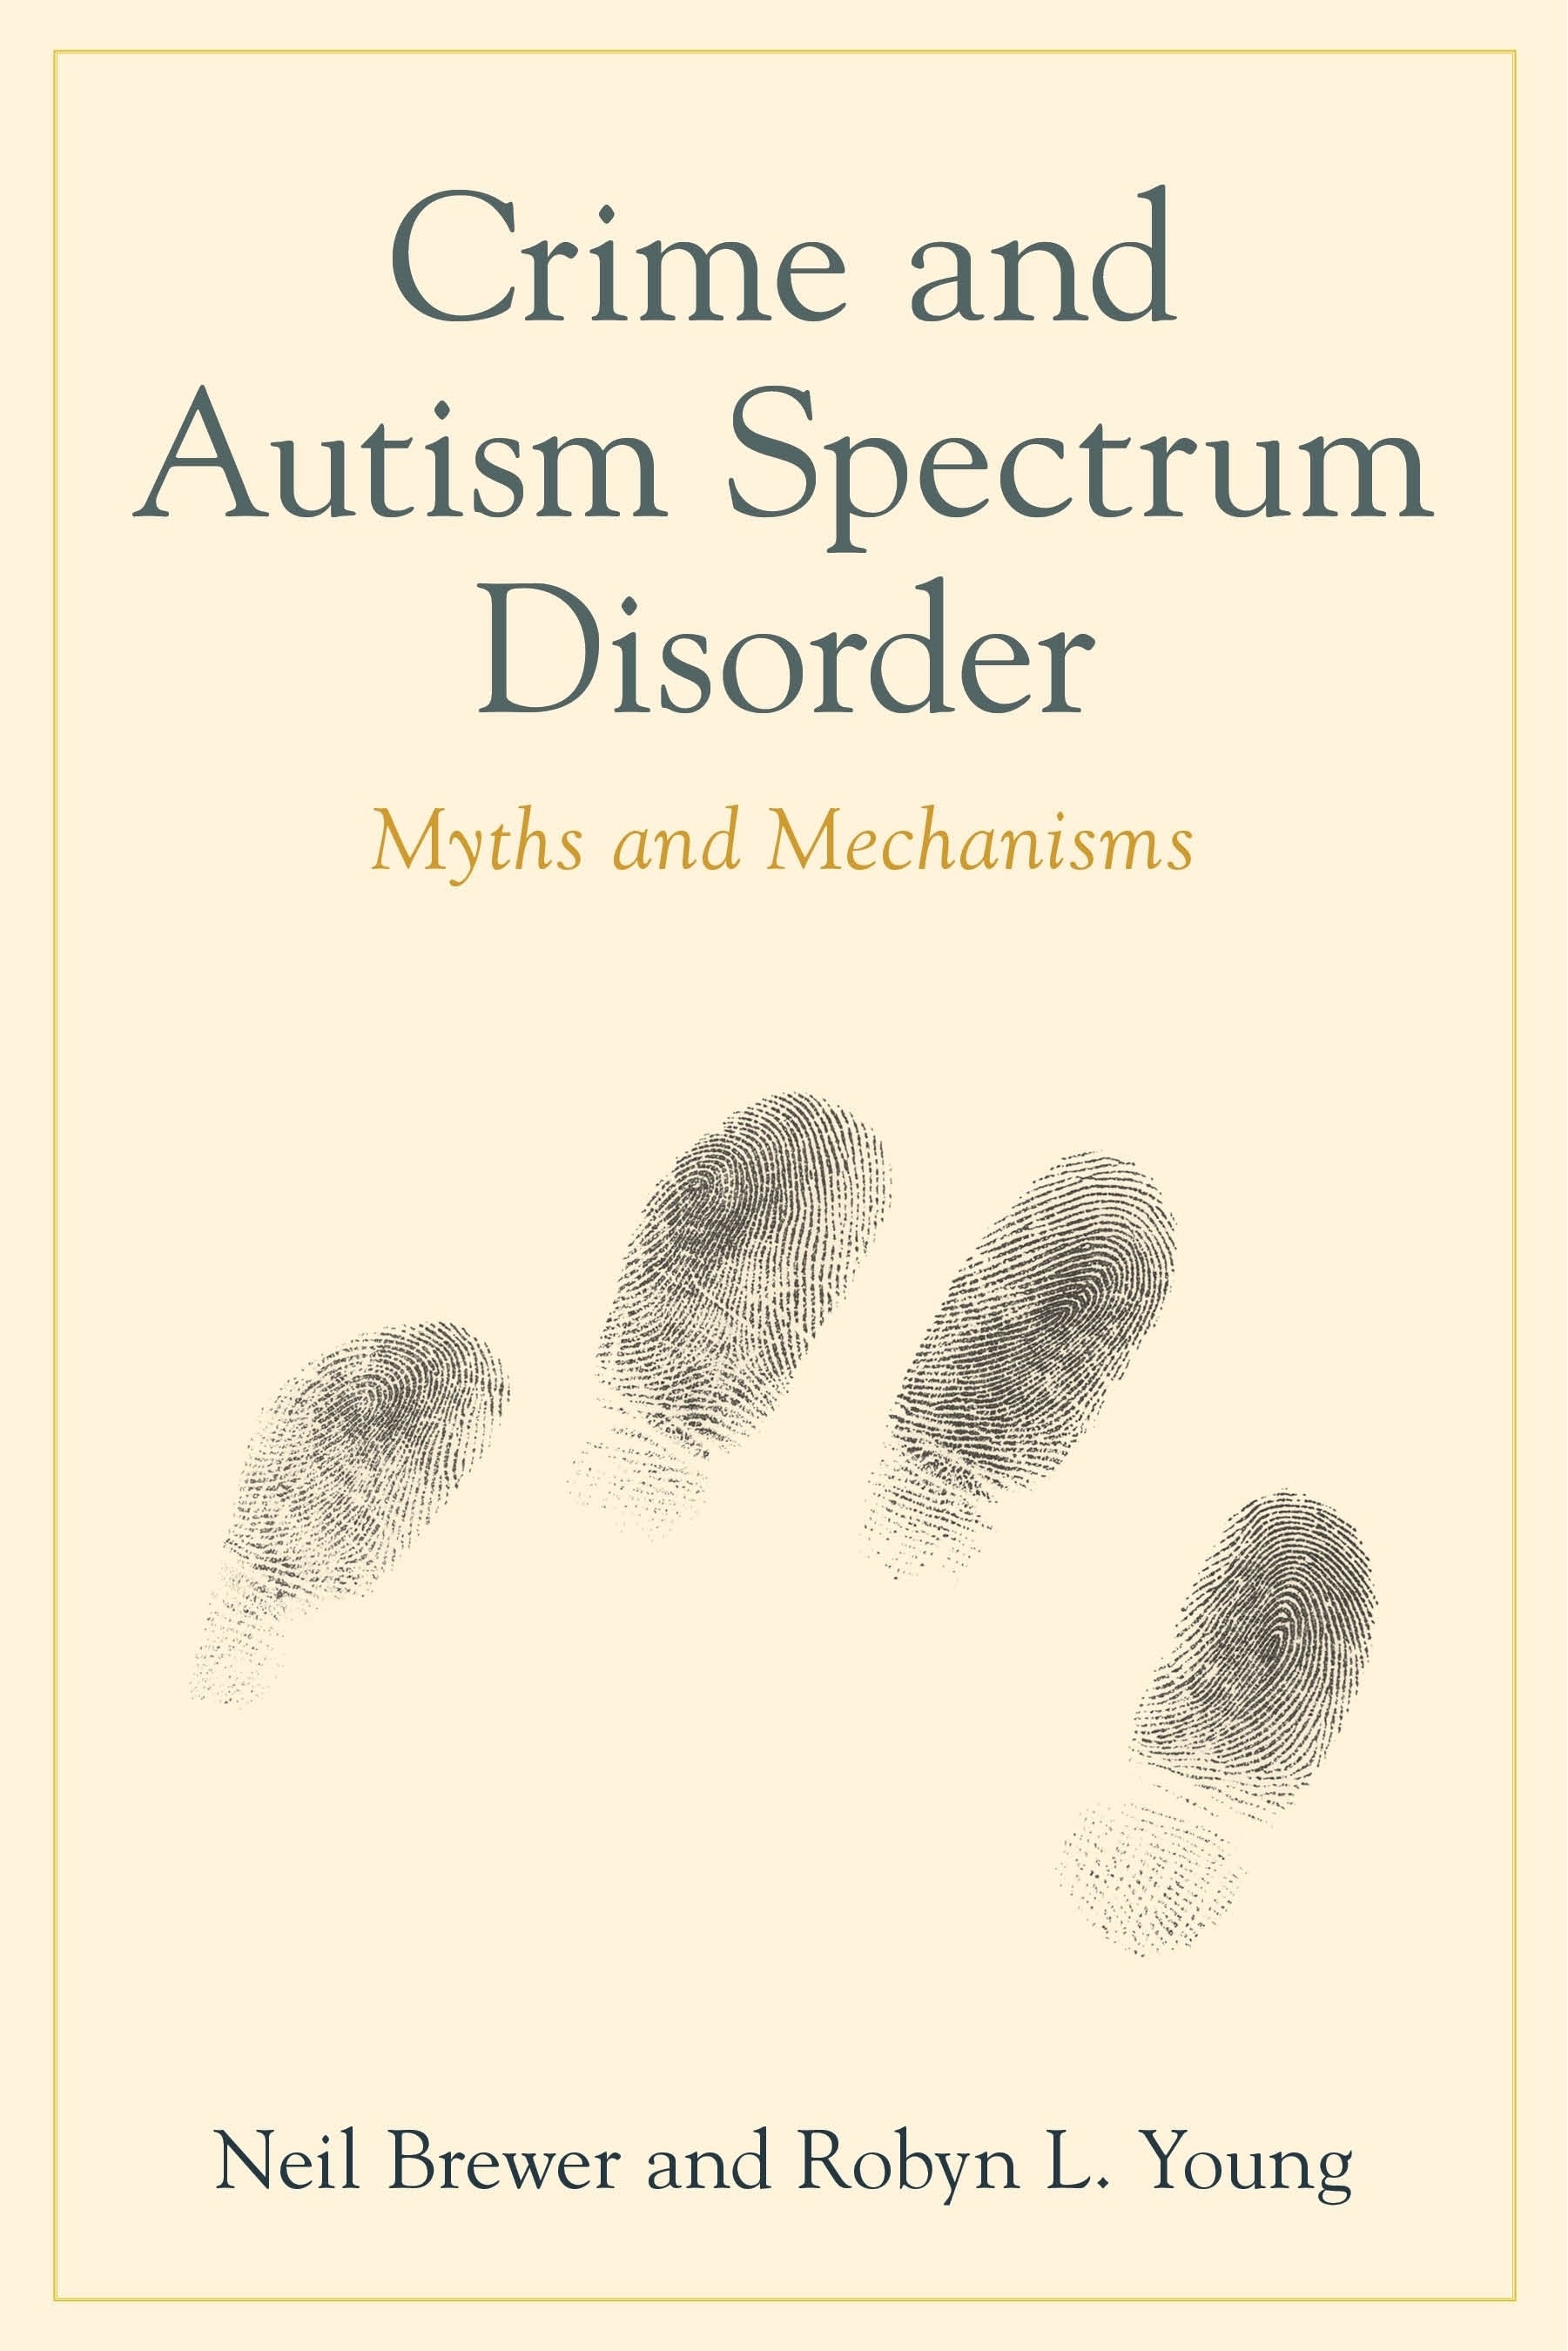 Crime and Autism Spectrum Disorder by Neil Brewer, Robyn Louise Young